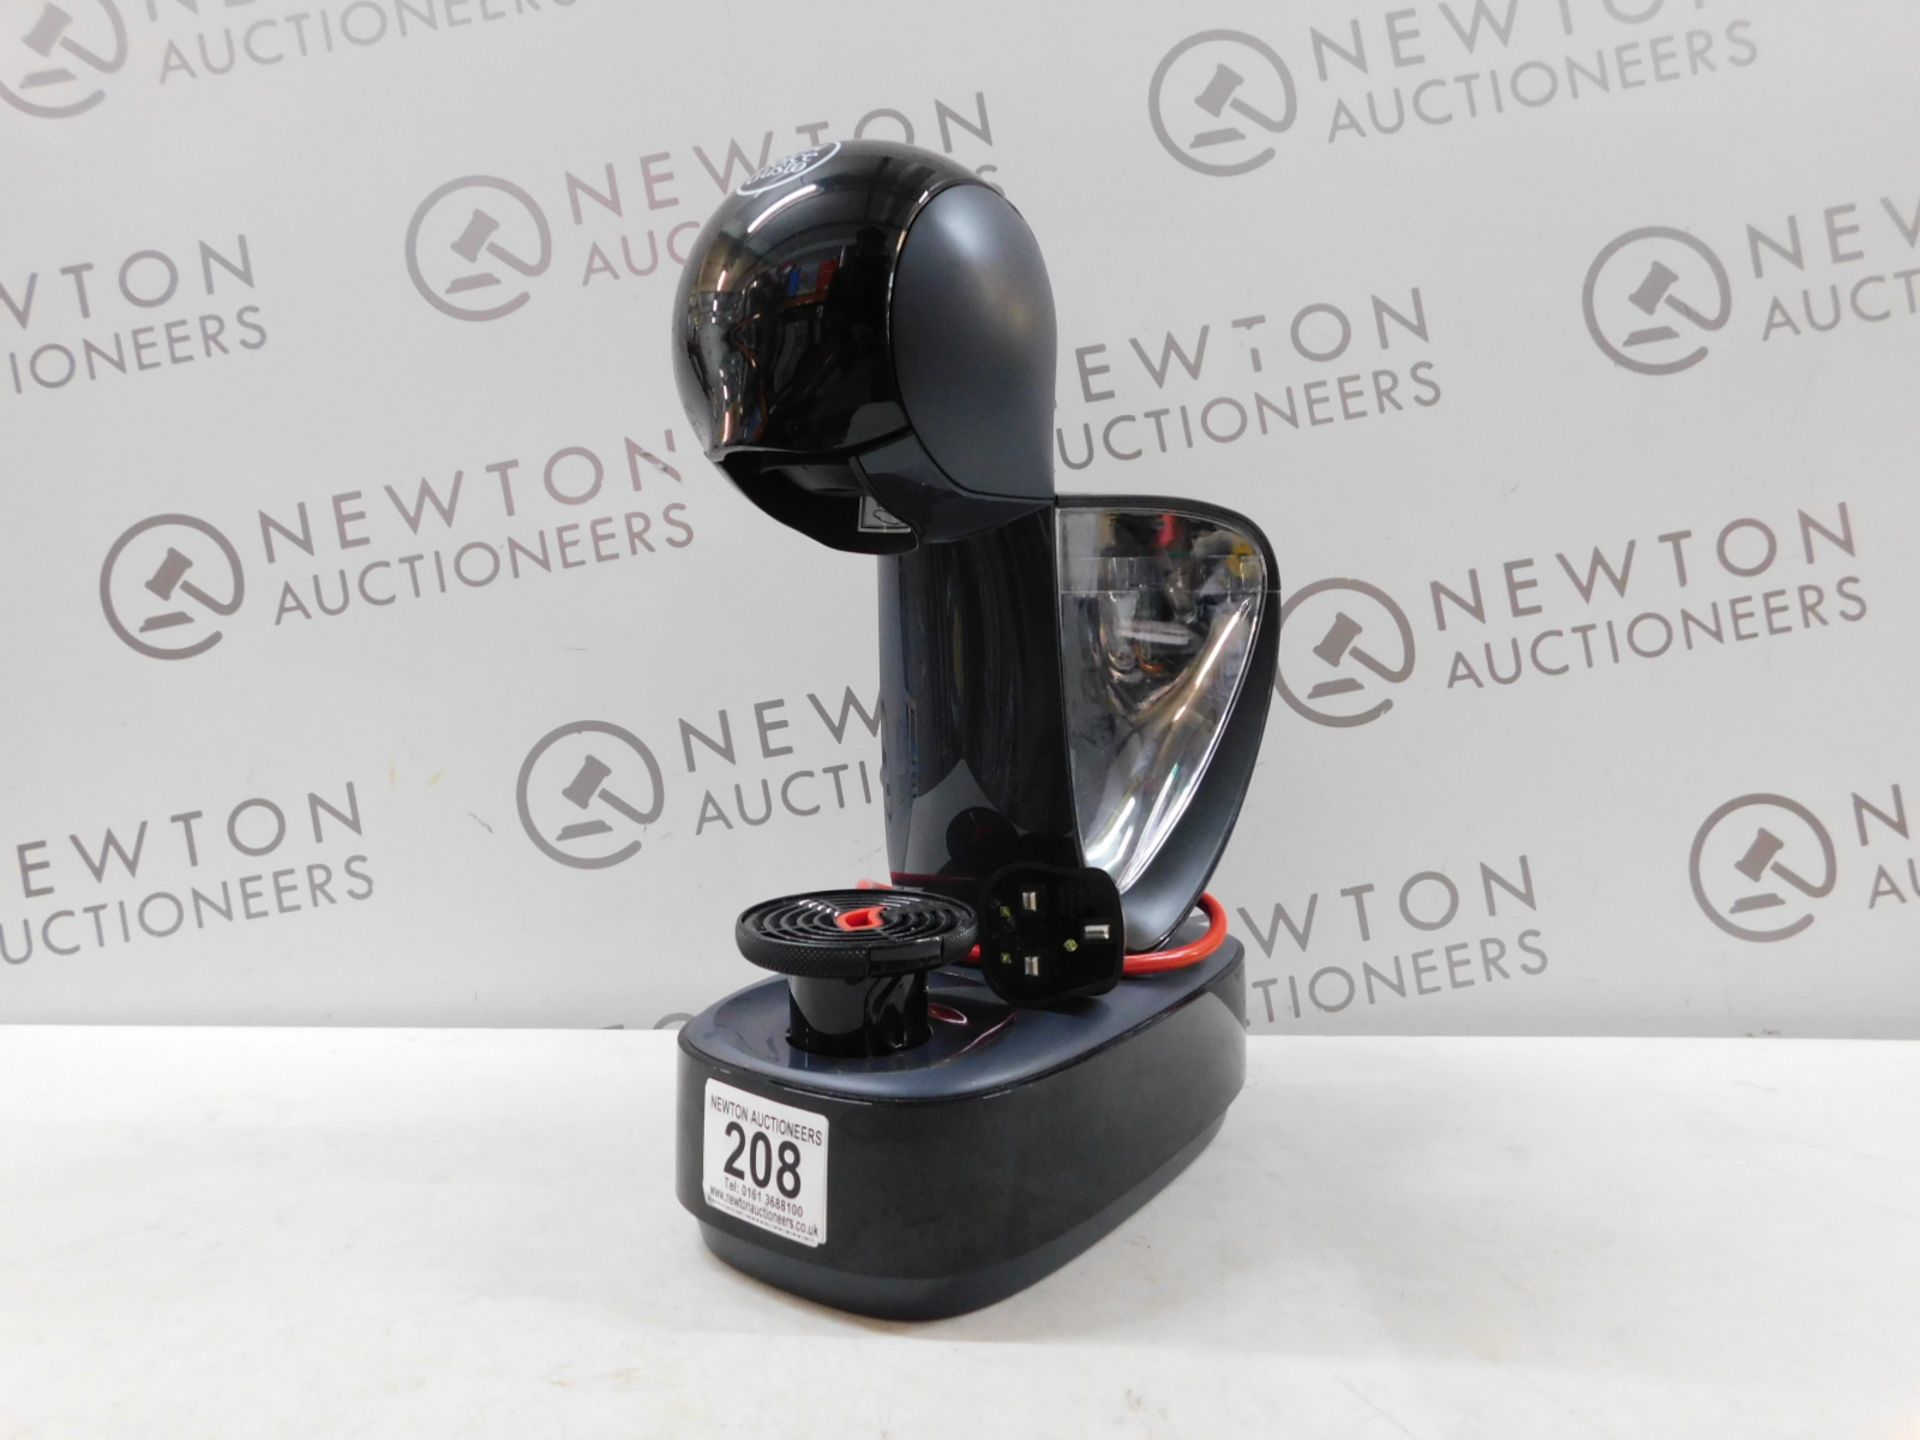 1 NESCAFE DOLCE GUSTO INFINISSIMA AUTOMATIC COFFEE POD MACHINE BY KRUPS RRP £114.99